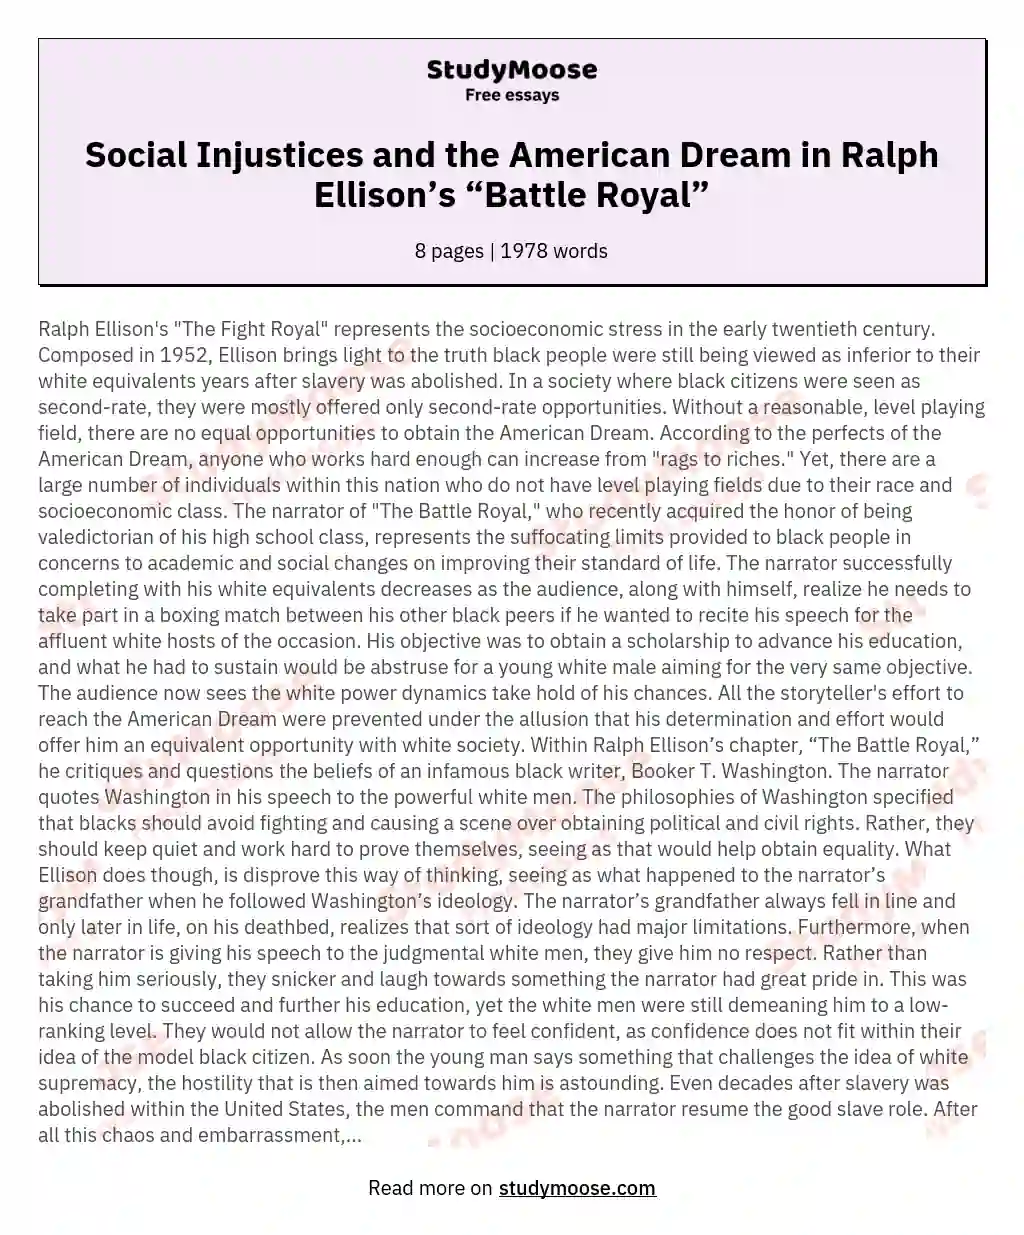 Social Injustices and the American Dream in Ralph Ellison’s “Battle Royal”